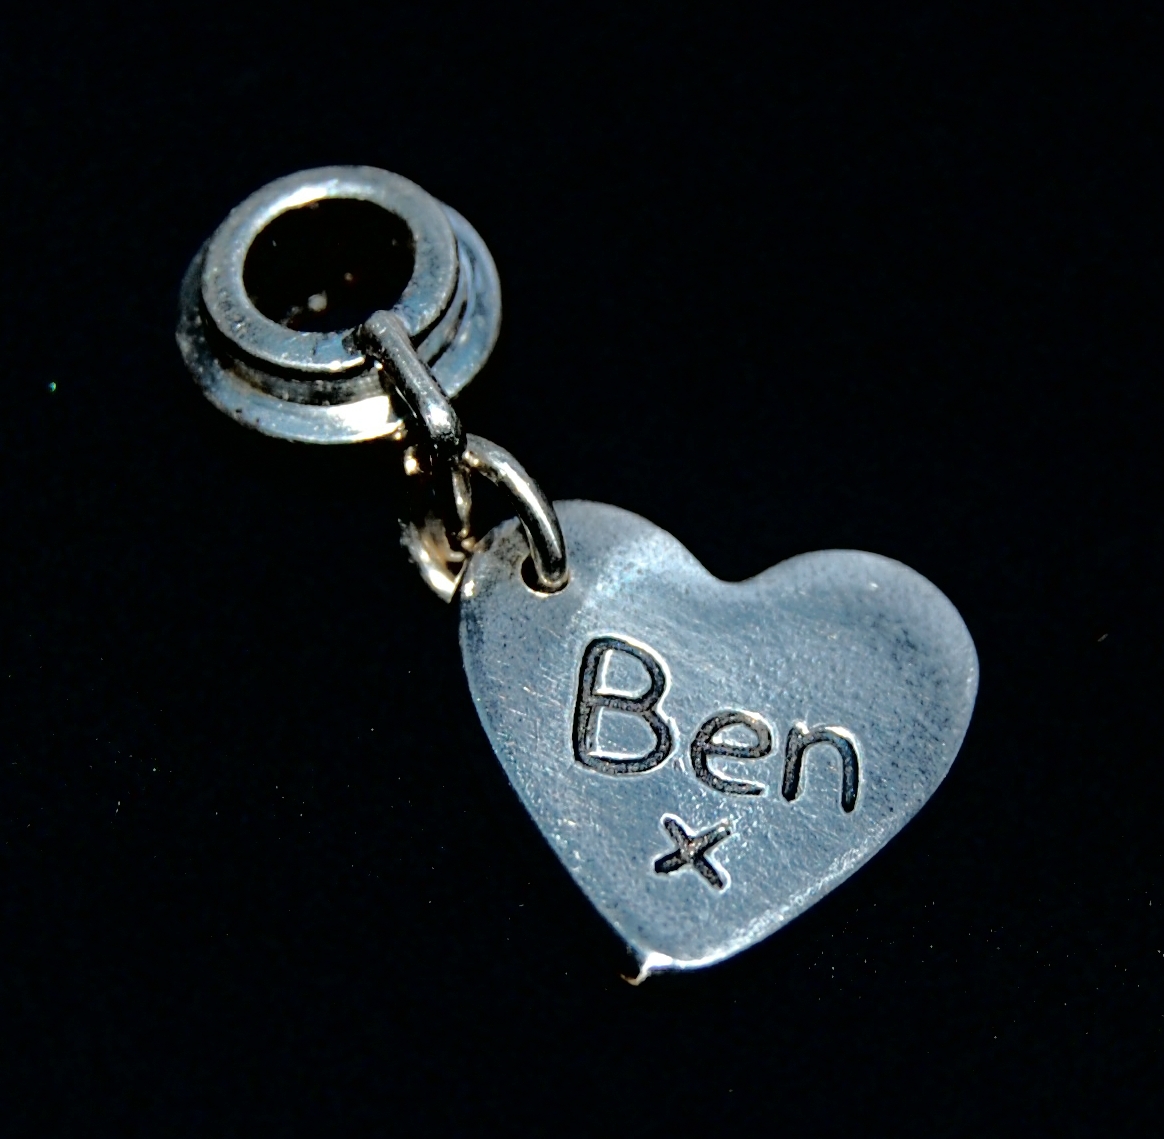 Small silver heart charm with name hand inscribed. Presented on a charm carrier ready to add to a bracelet or necklace.